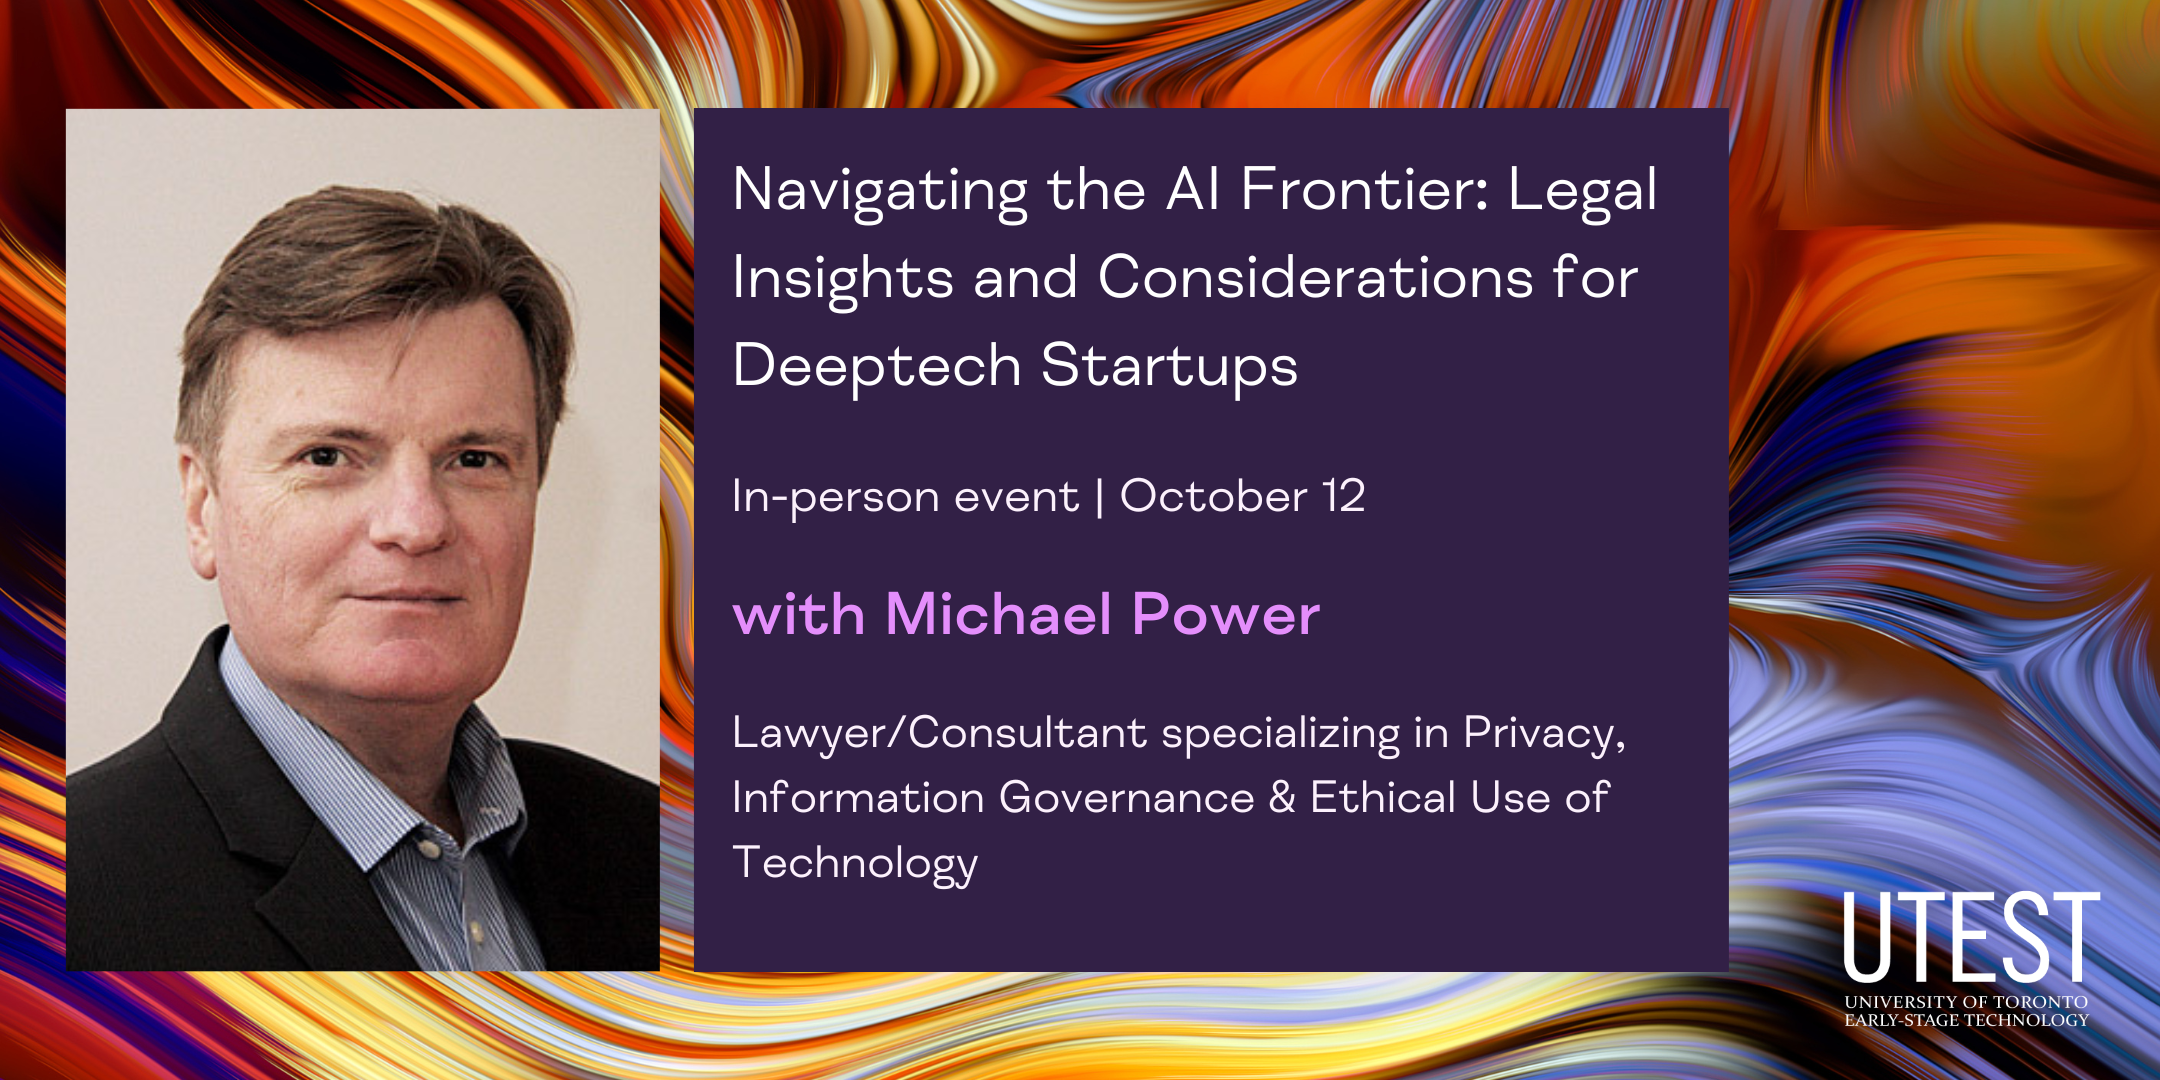 Event Title: Navigating the AI Frontier: Legal Insights and Considerations for DeepTech